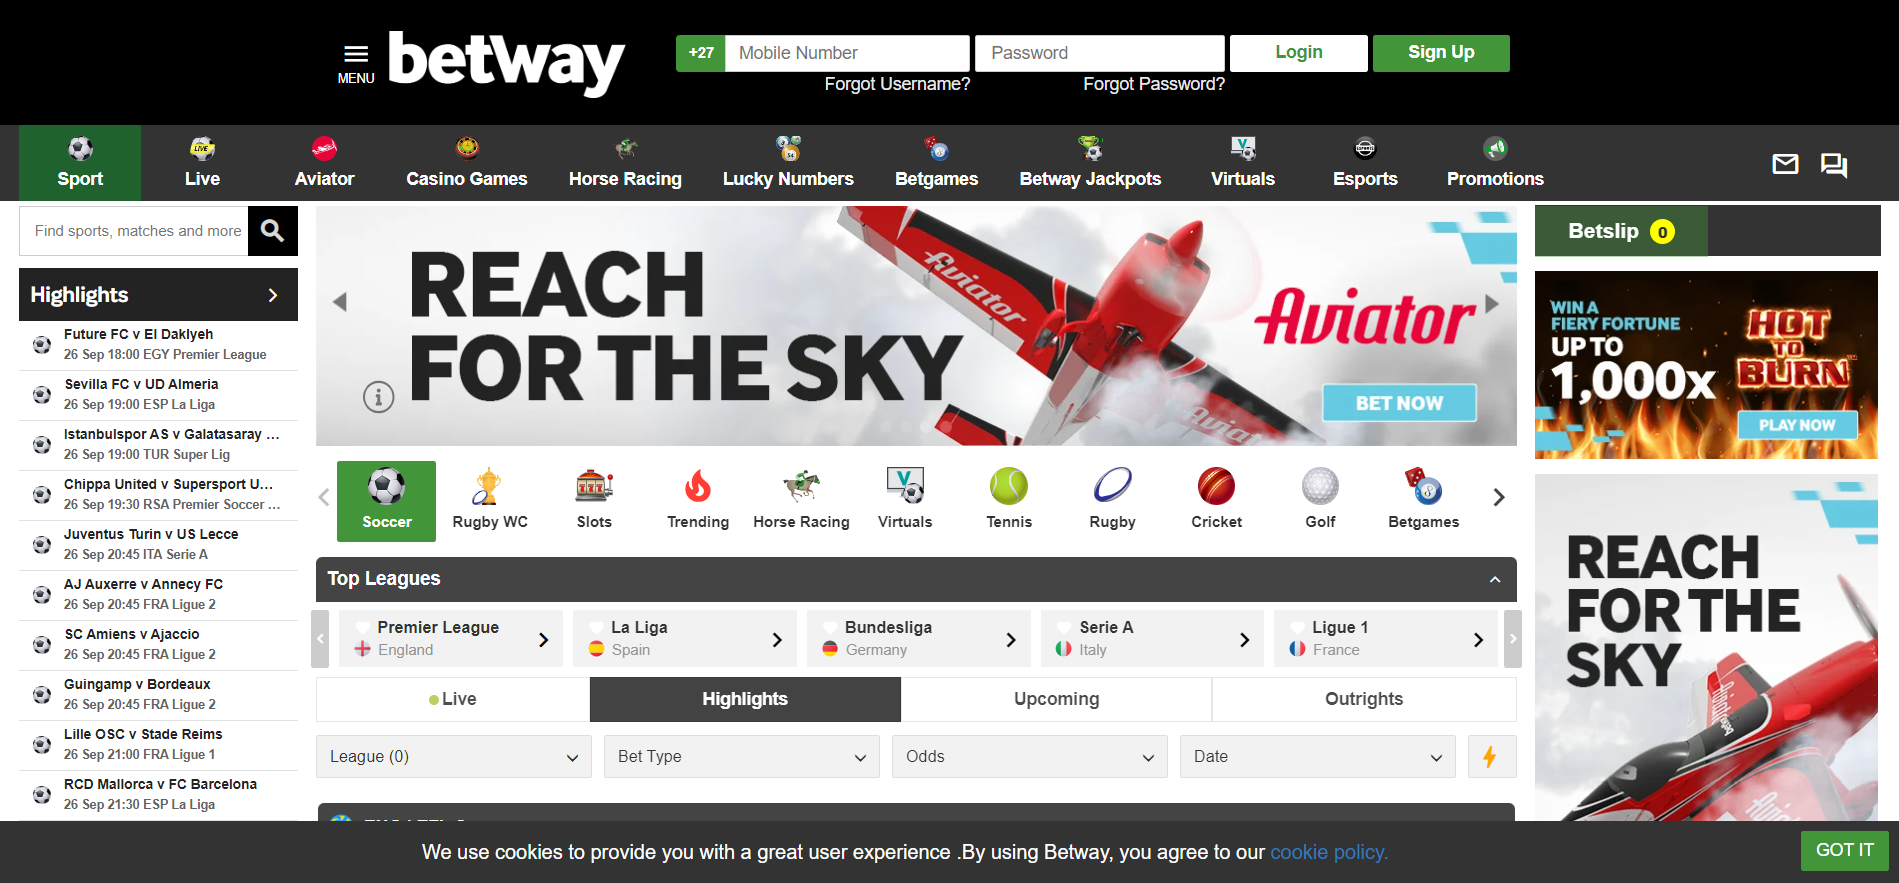 Image for Betway sports betting homepage